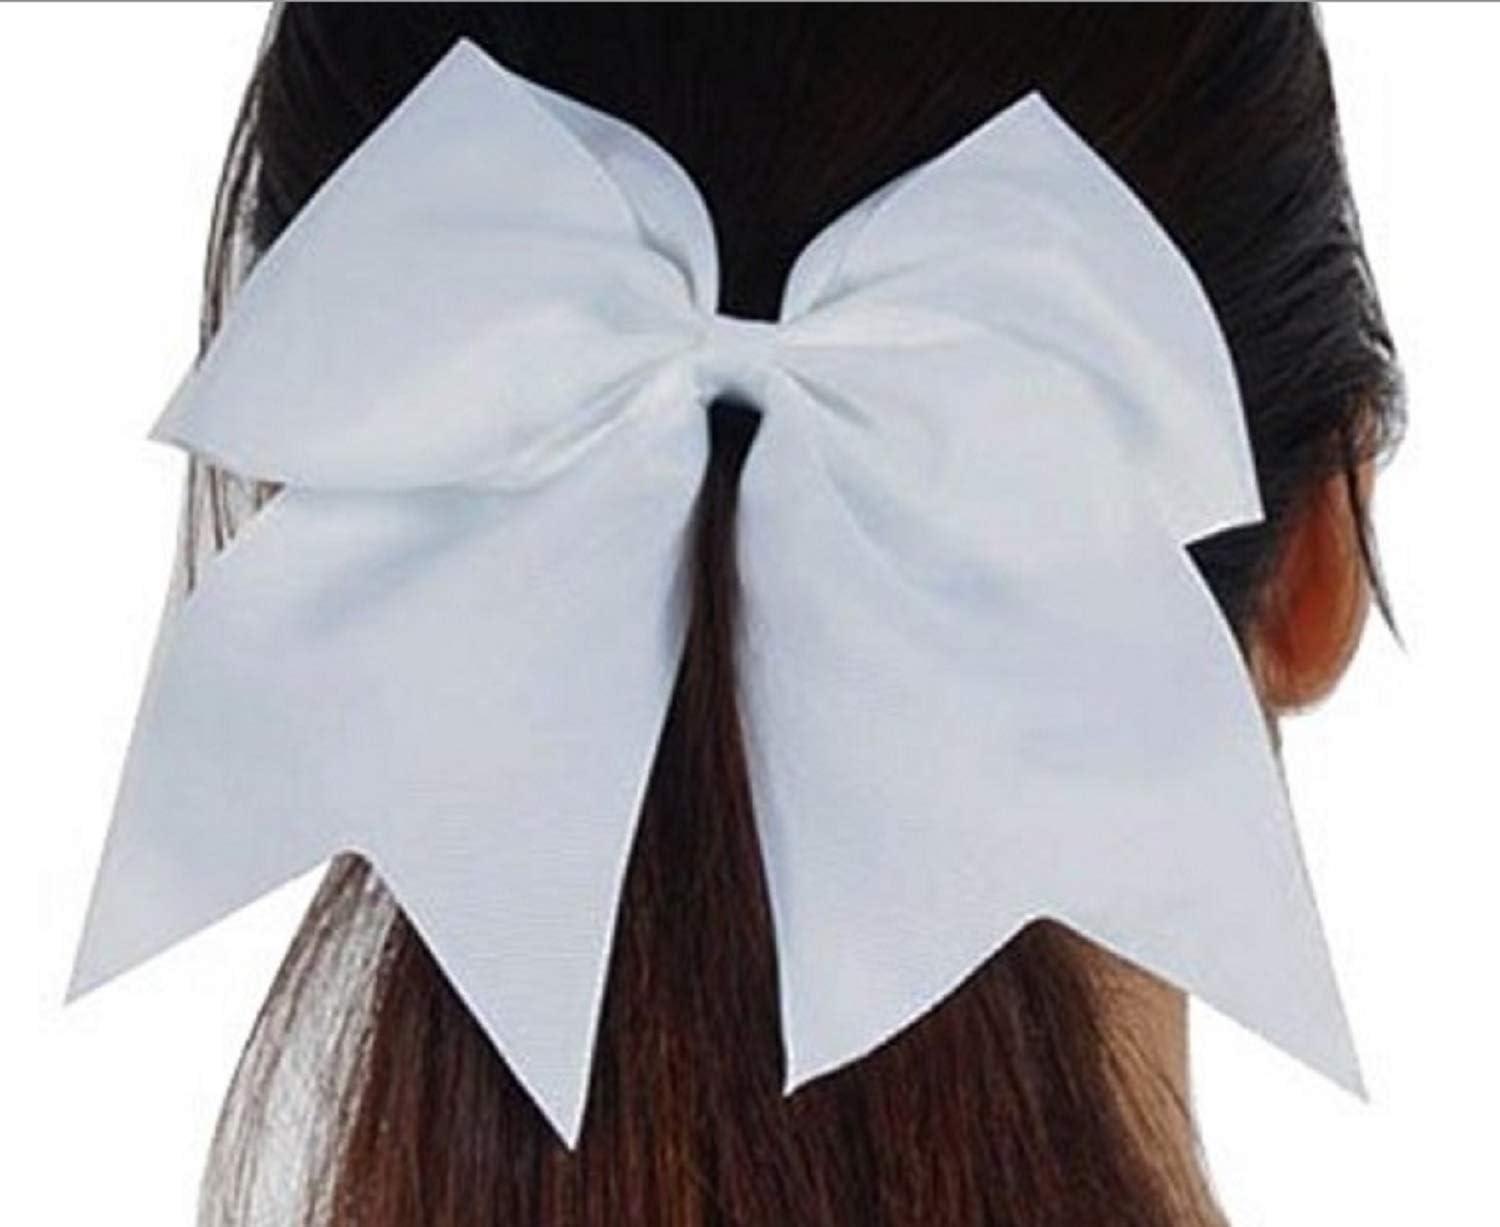 Light Pink Cheer Bow for Girls Large Hair Bows with Ponytail Holder Ribbon | Kenz Laurenz